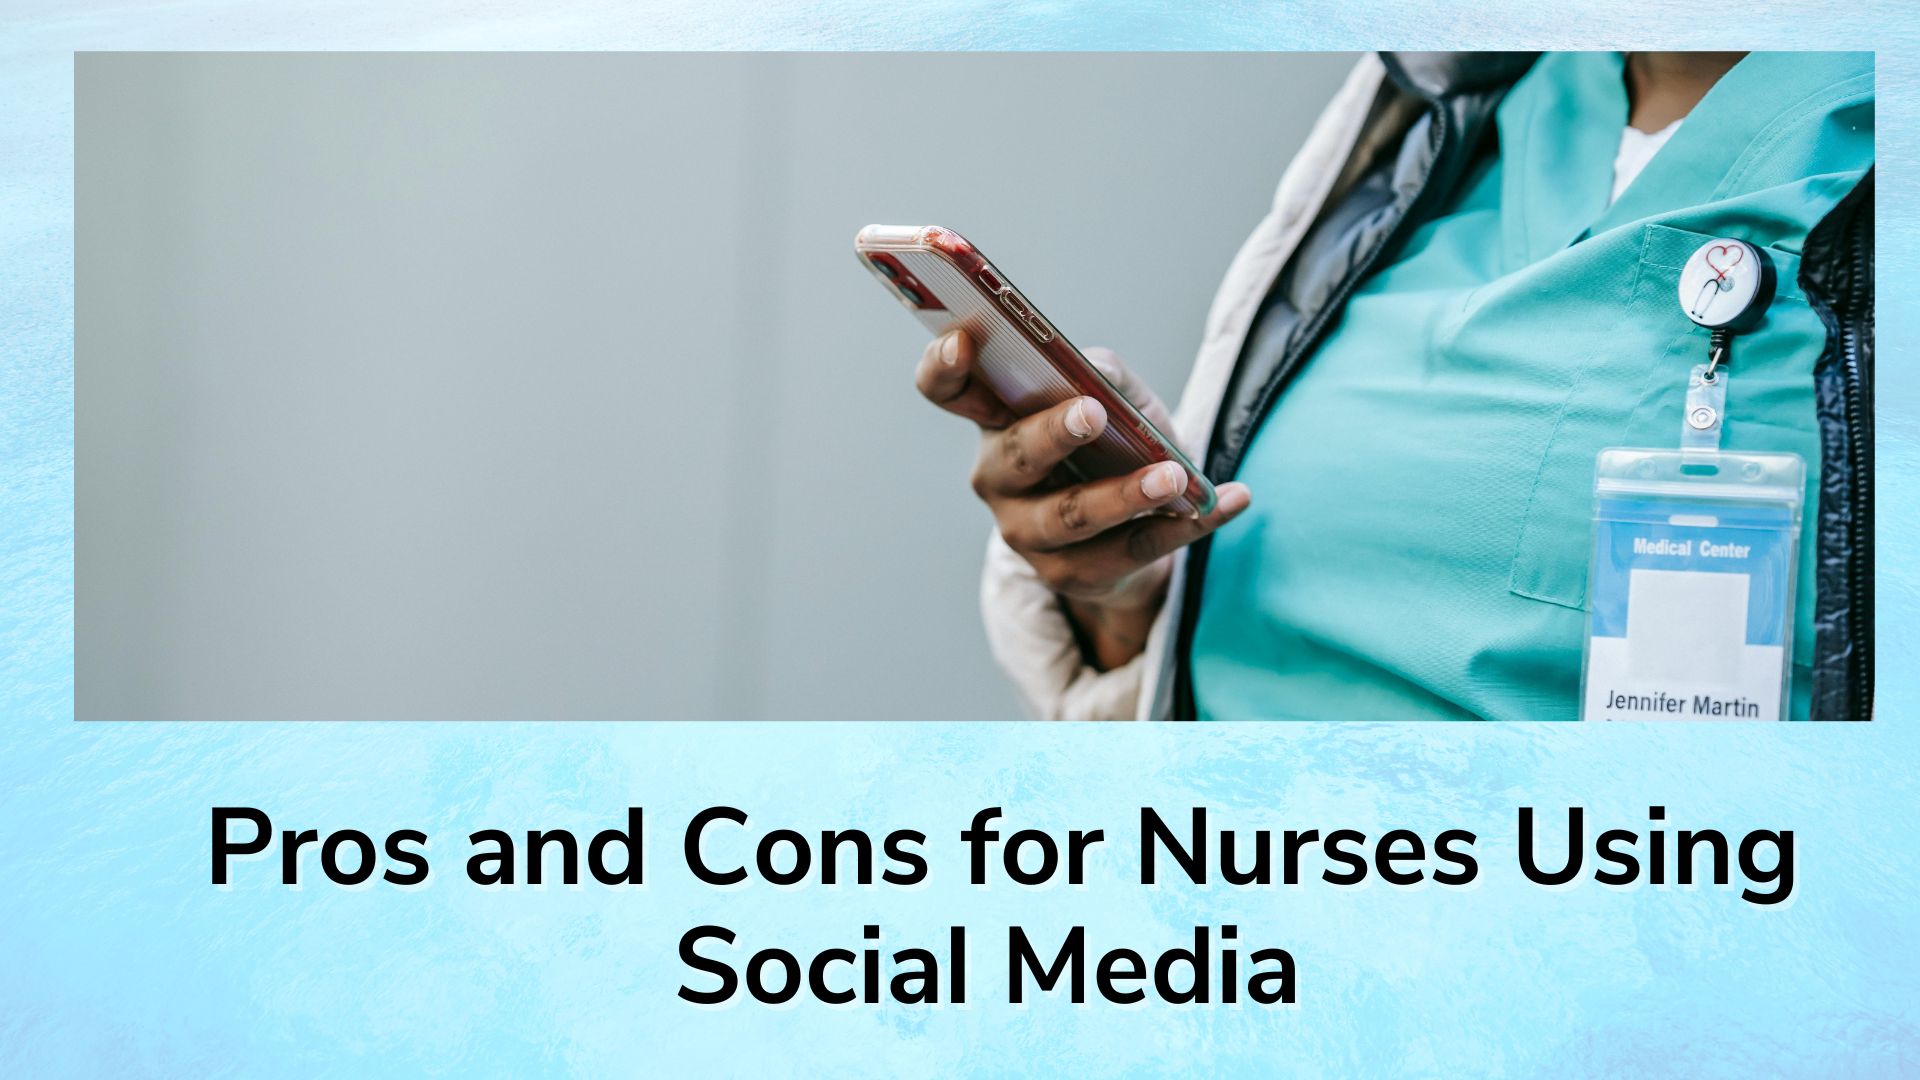 What are the Pros and Cons for Nurses Using Social Media?